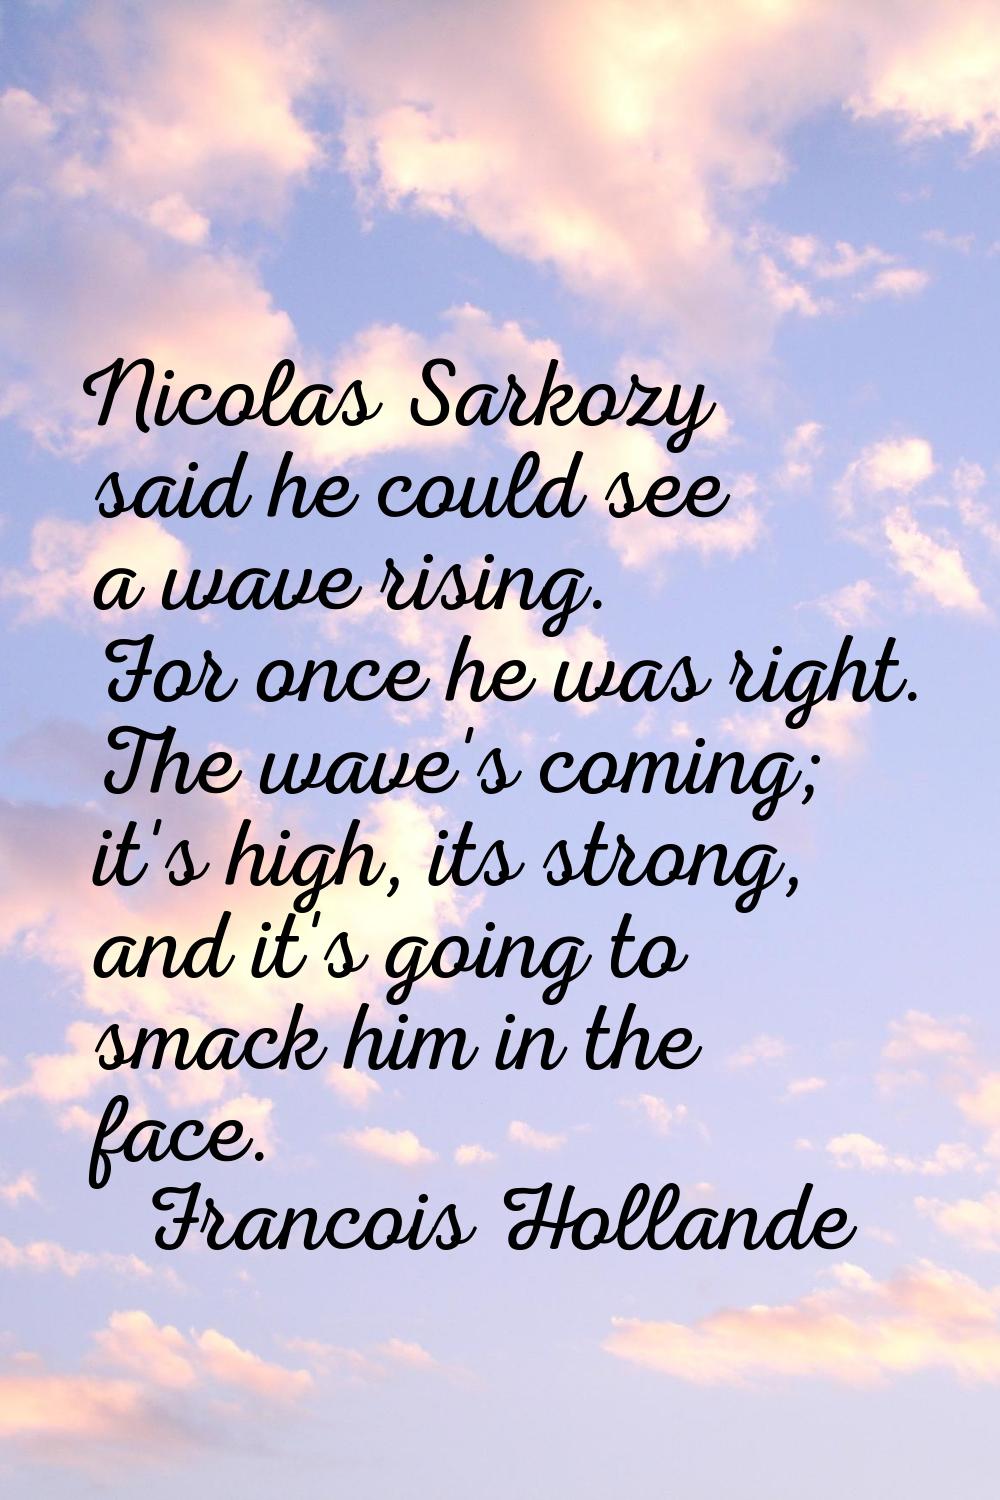 Nicolas Sarkozy said he could see a wave rising. For once he was right. The wave's coming; it's hig